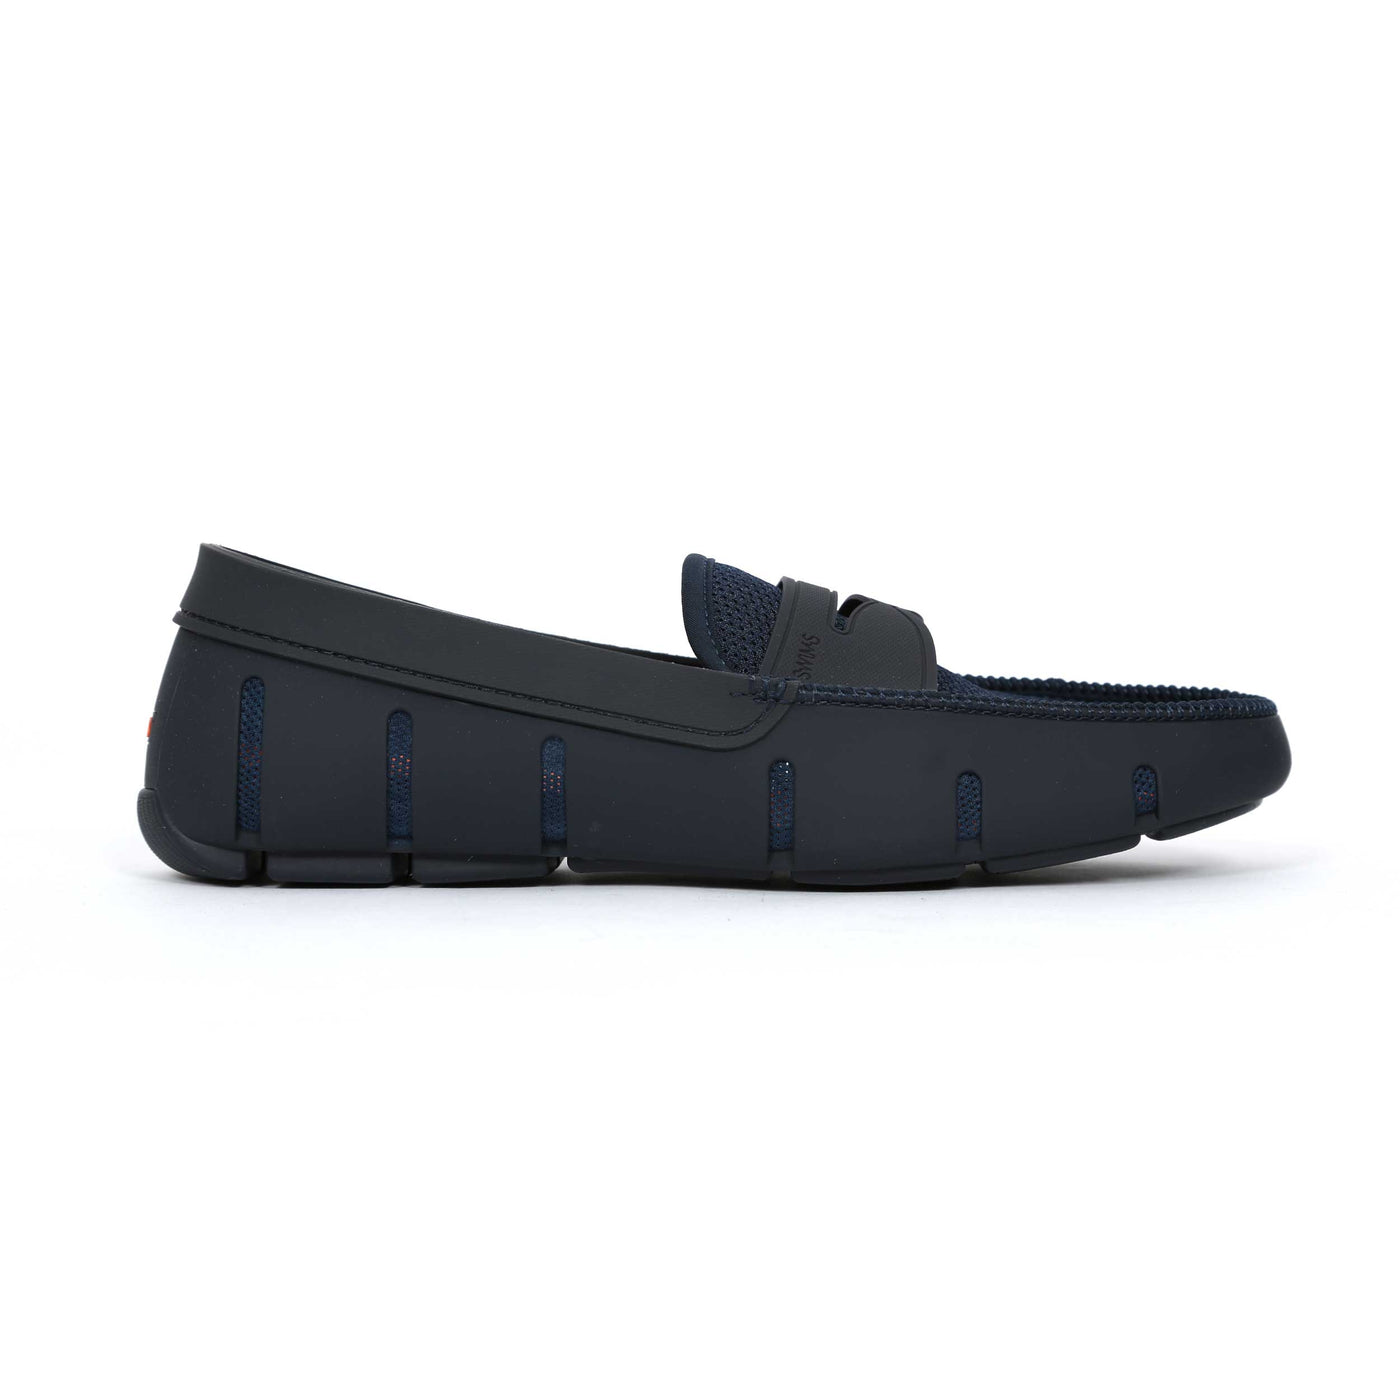 Swims Penny Loafer Shoe in Navy